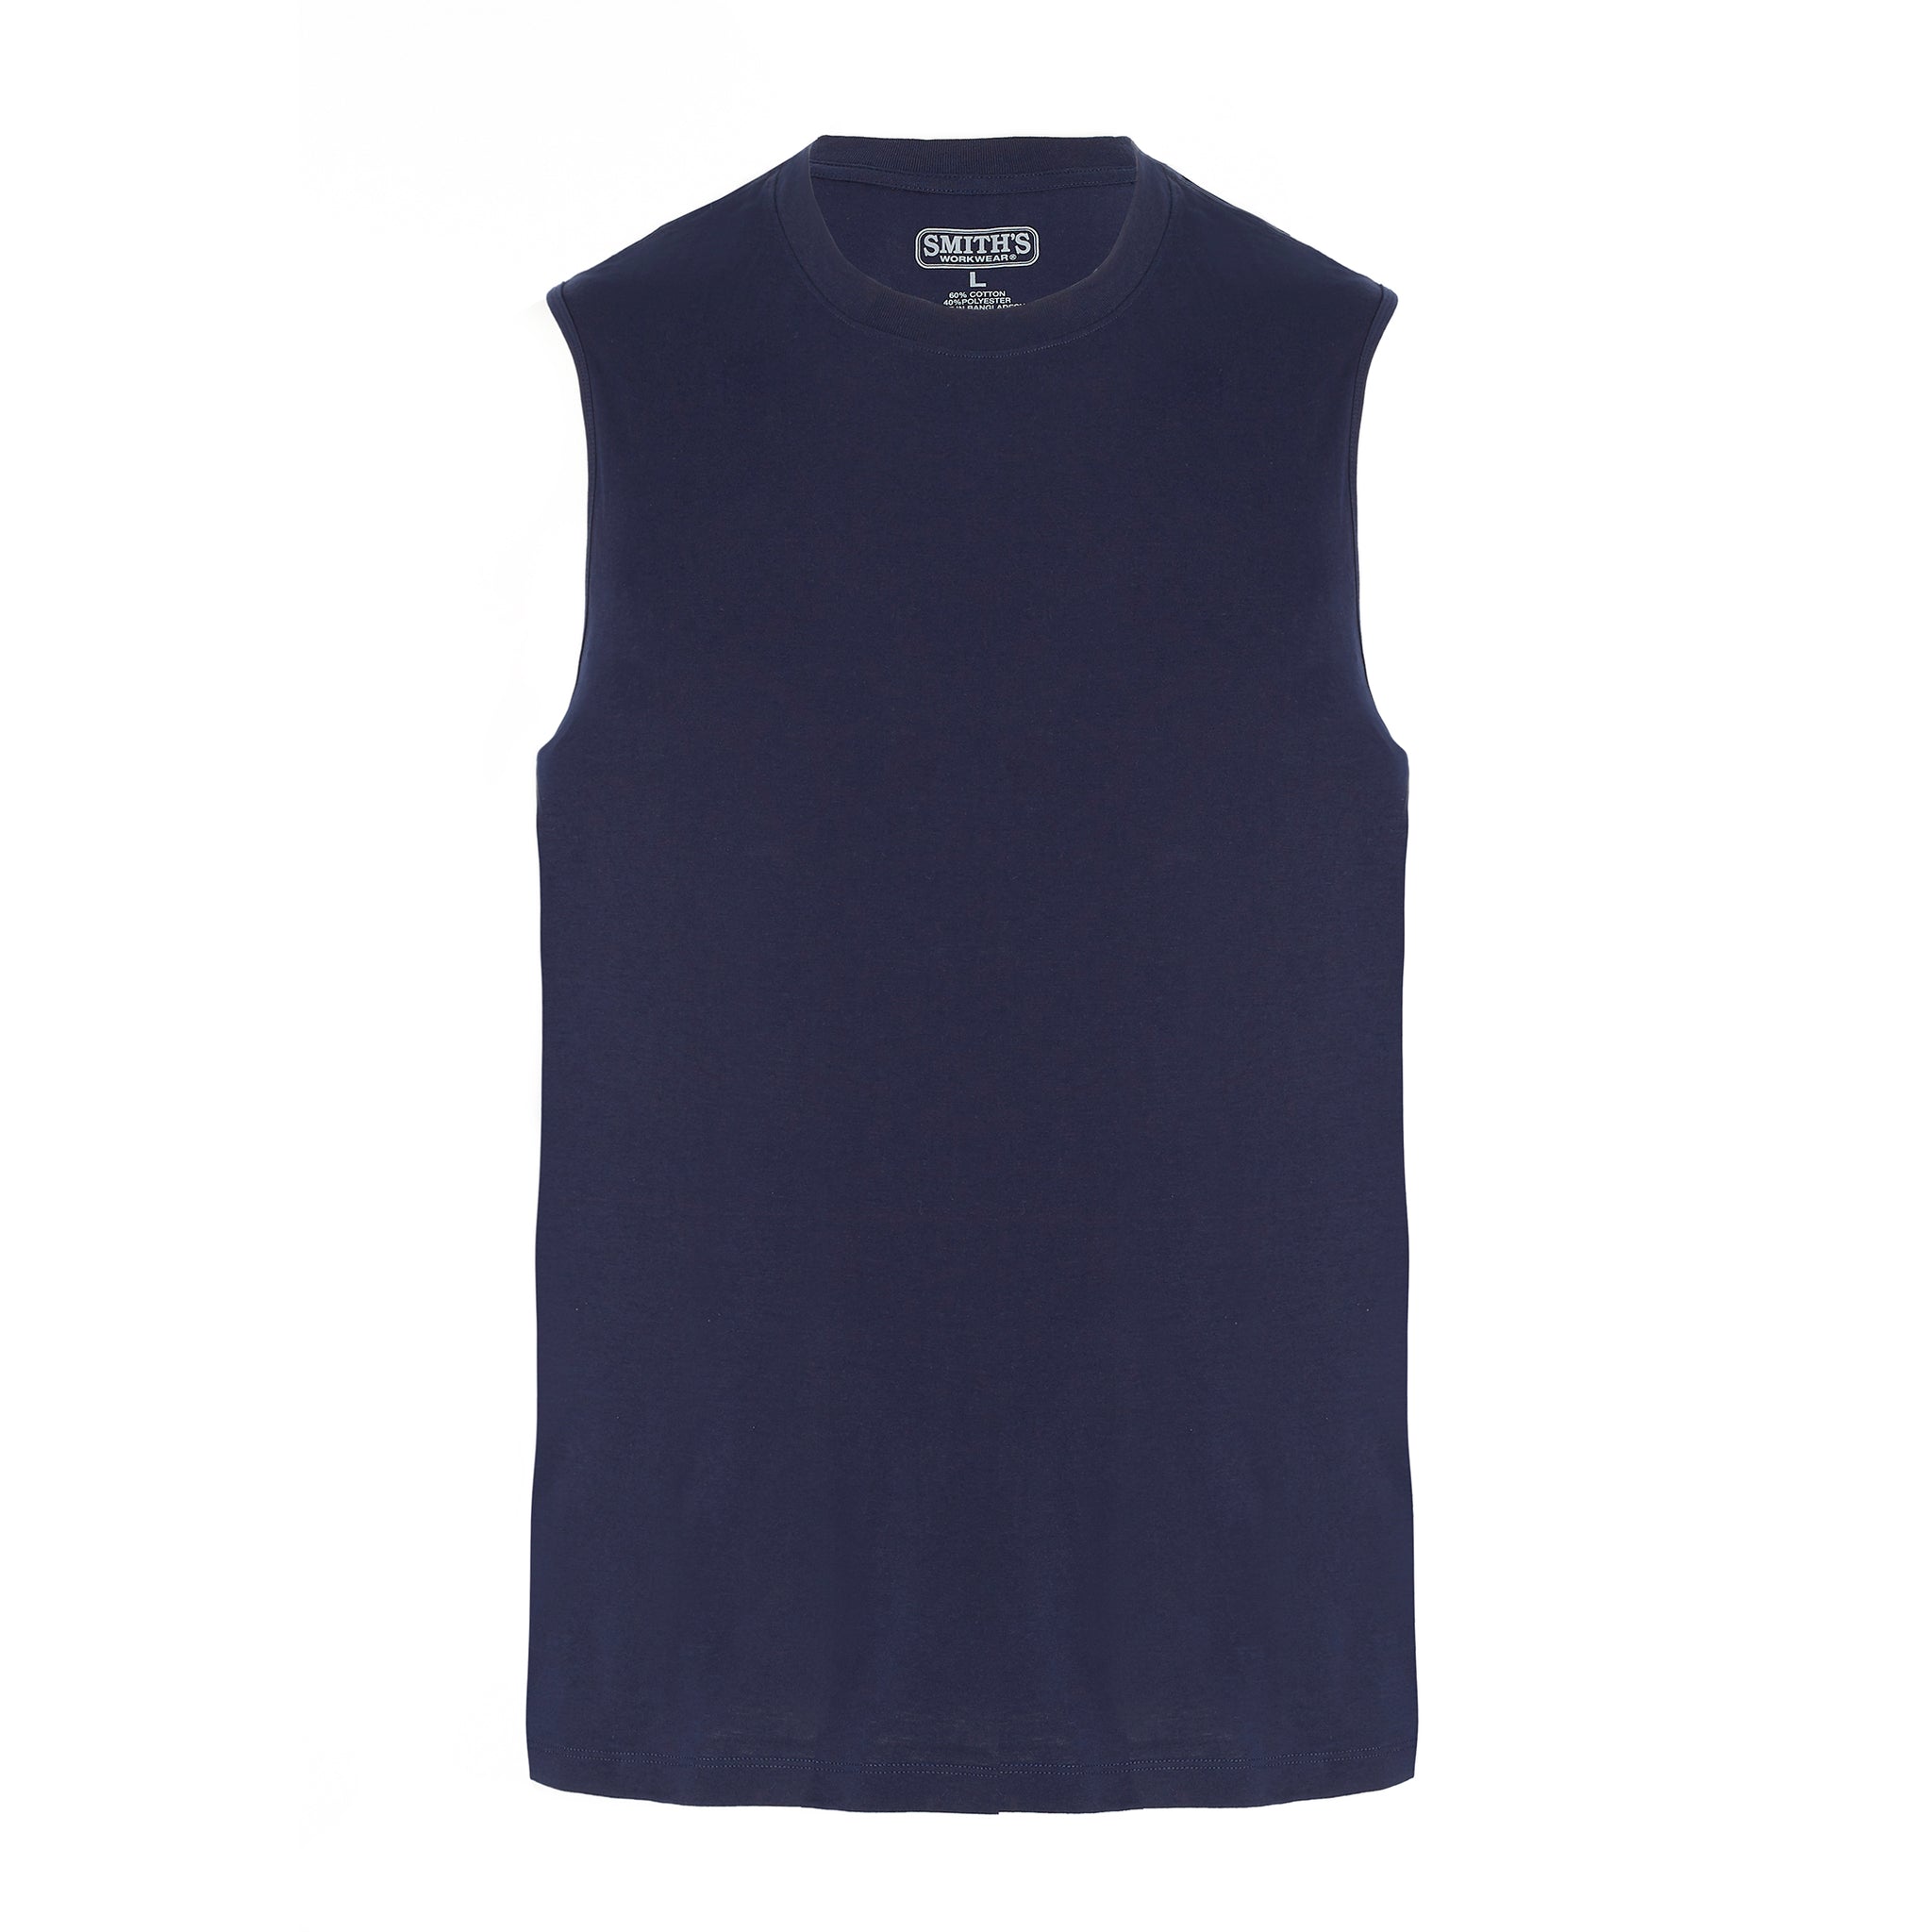 COTTON MUSCLE TEE